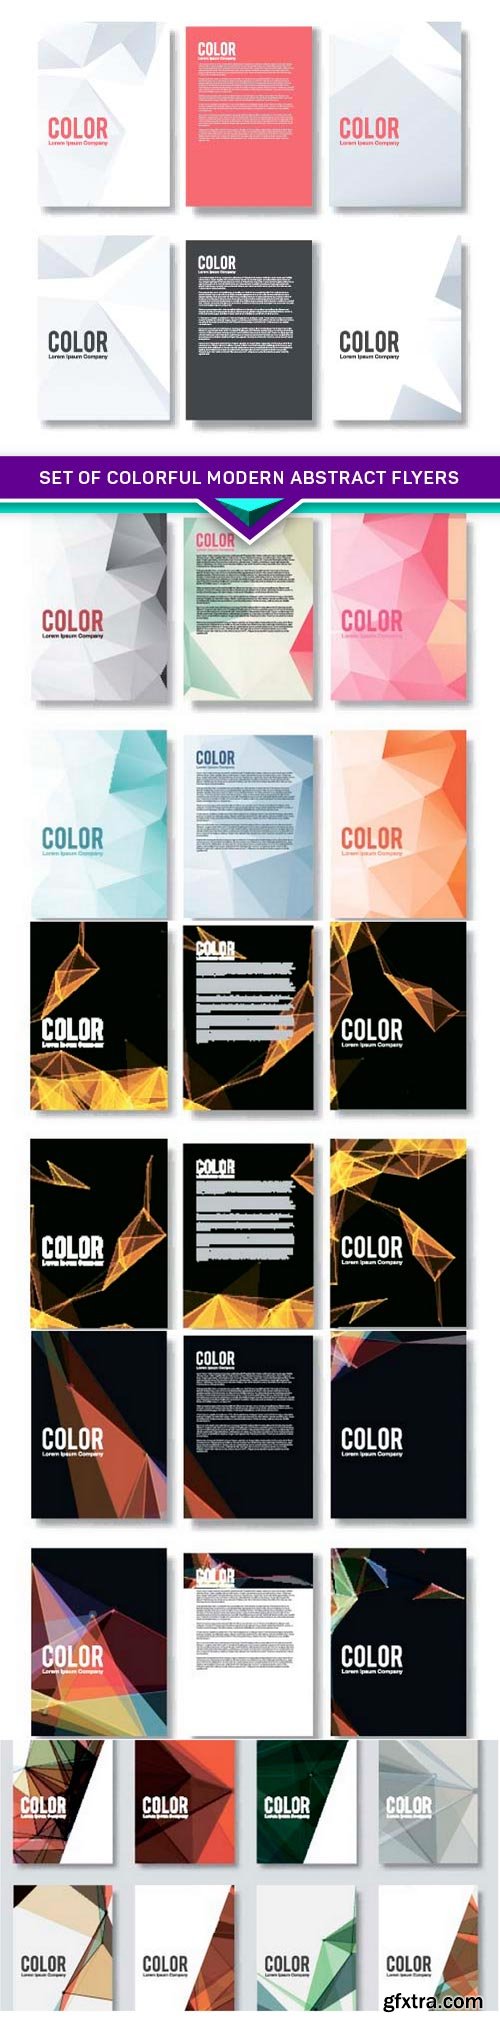 Set of Colorful Modern Abstract Flyers 5x EPS